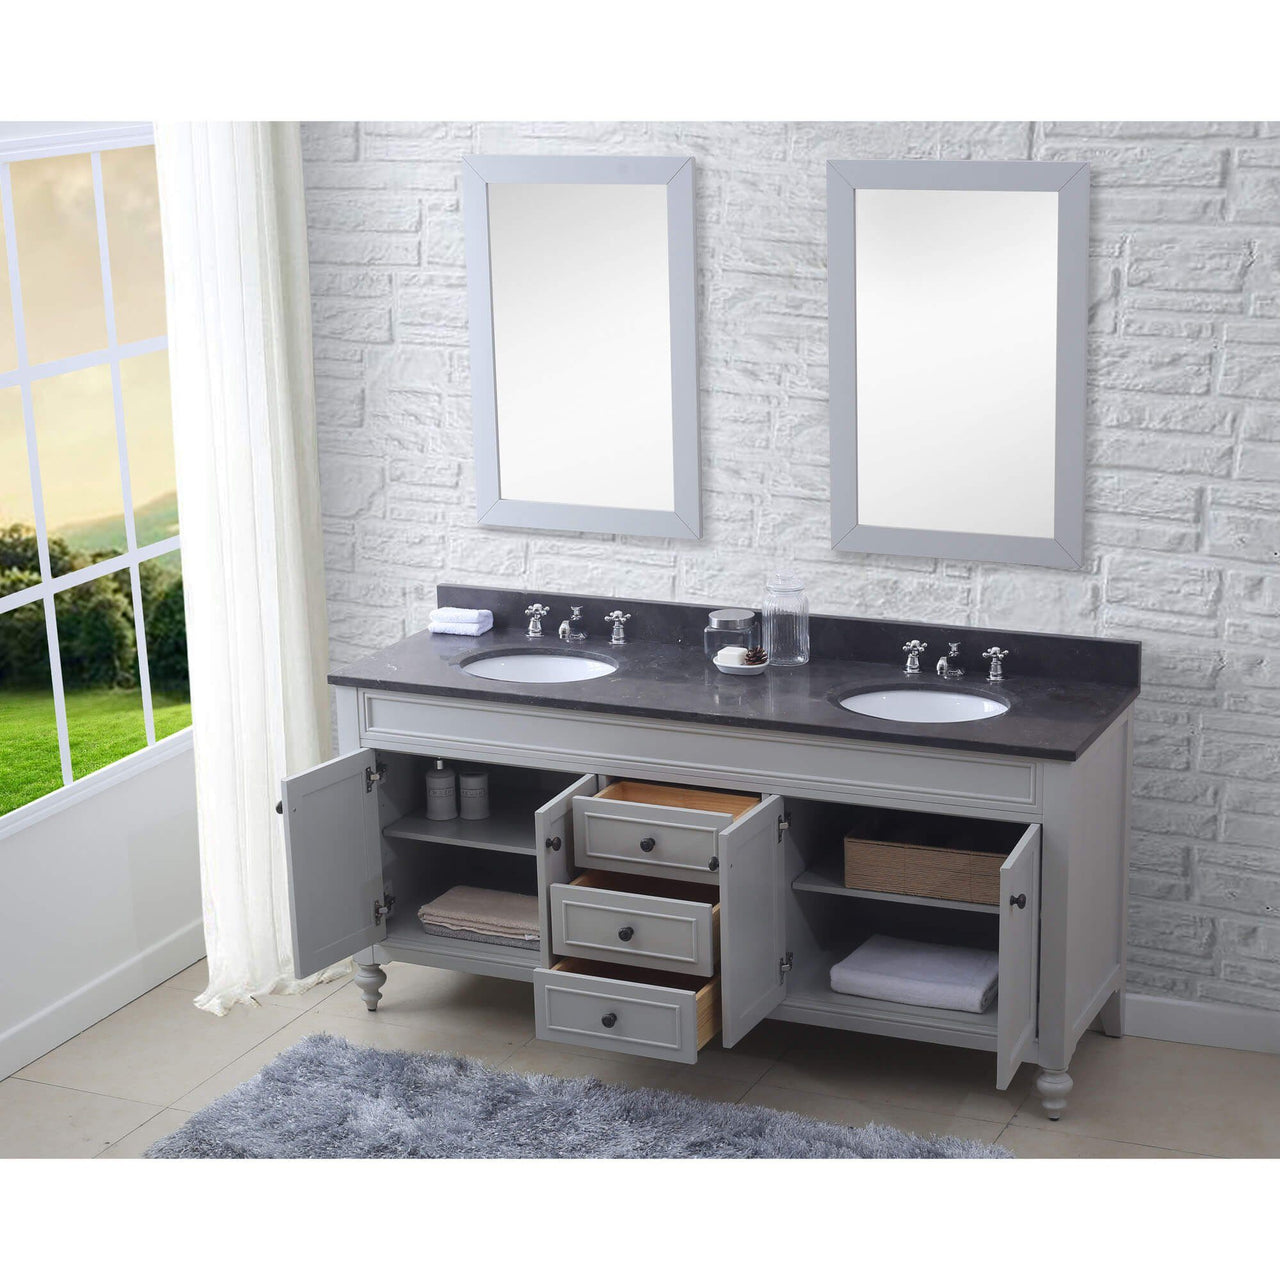 POTENZA 60" Earl Grey Double Sink Vanity With 2 Framed Mirrors And Faucets Vanity Water Creation 